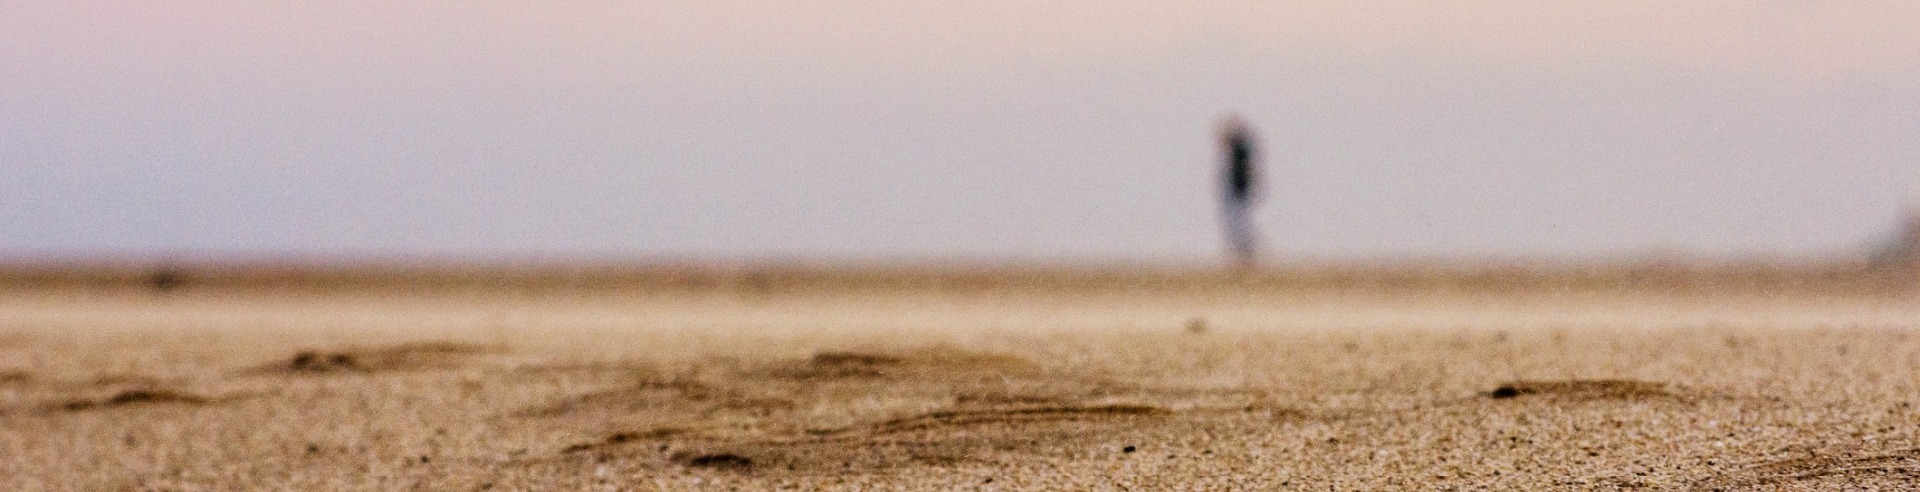 A man is standing in a desert landscape. He is on the horizon and his shape is blurred by the heat haze.